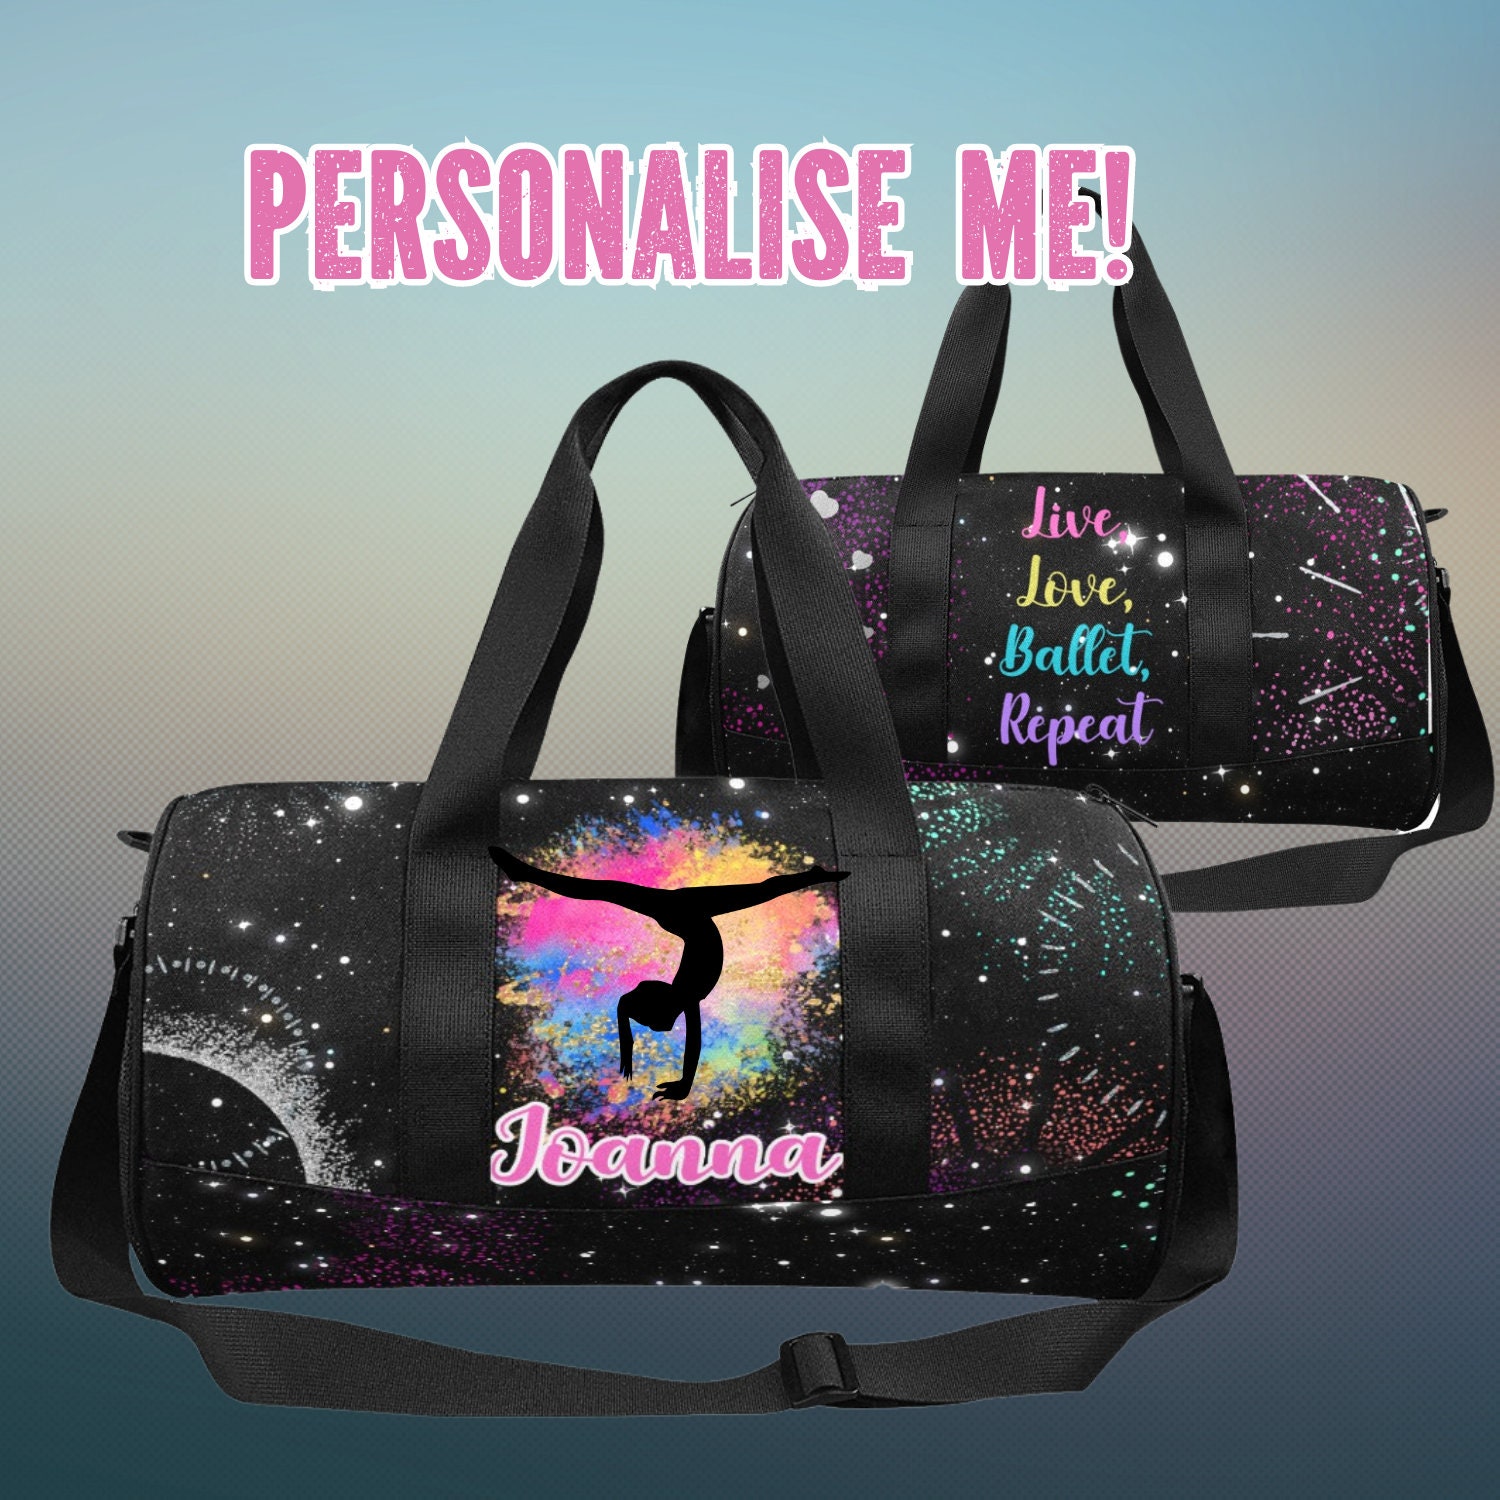 Custom Gymnastics with Name/Text Duffel Bag (Personalized